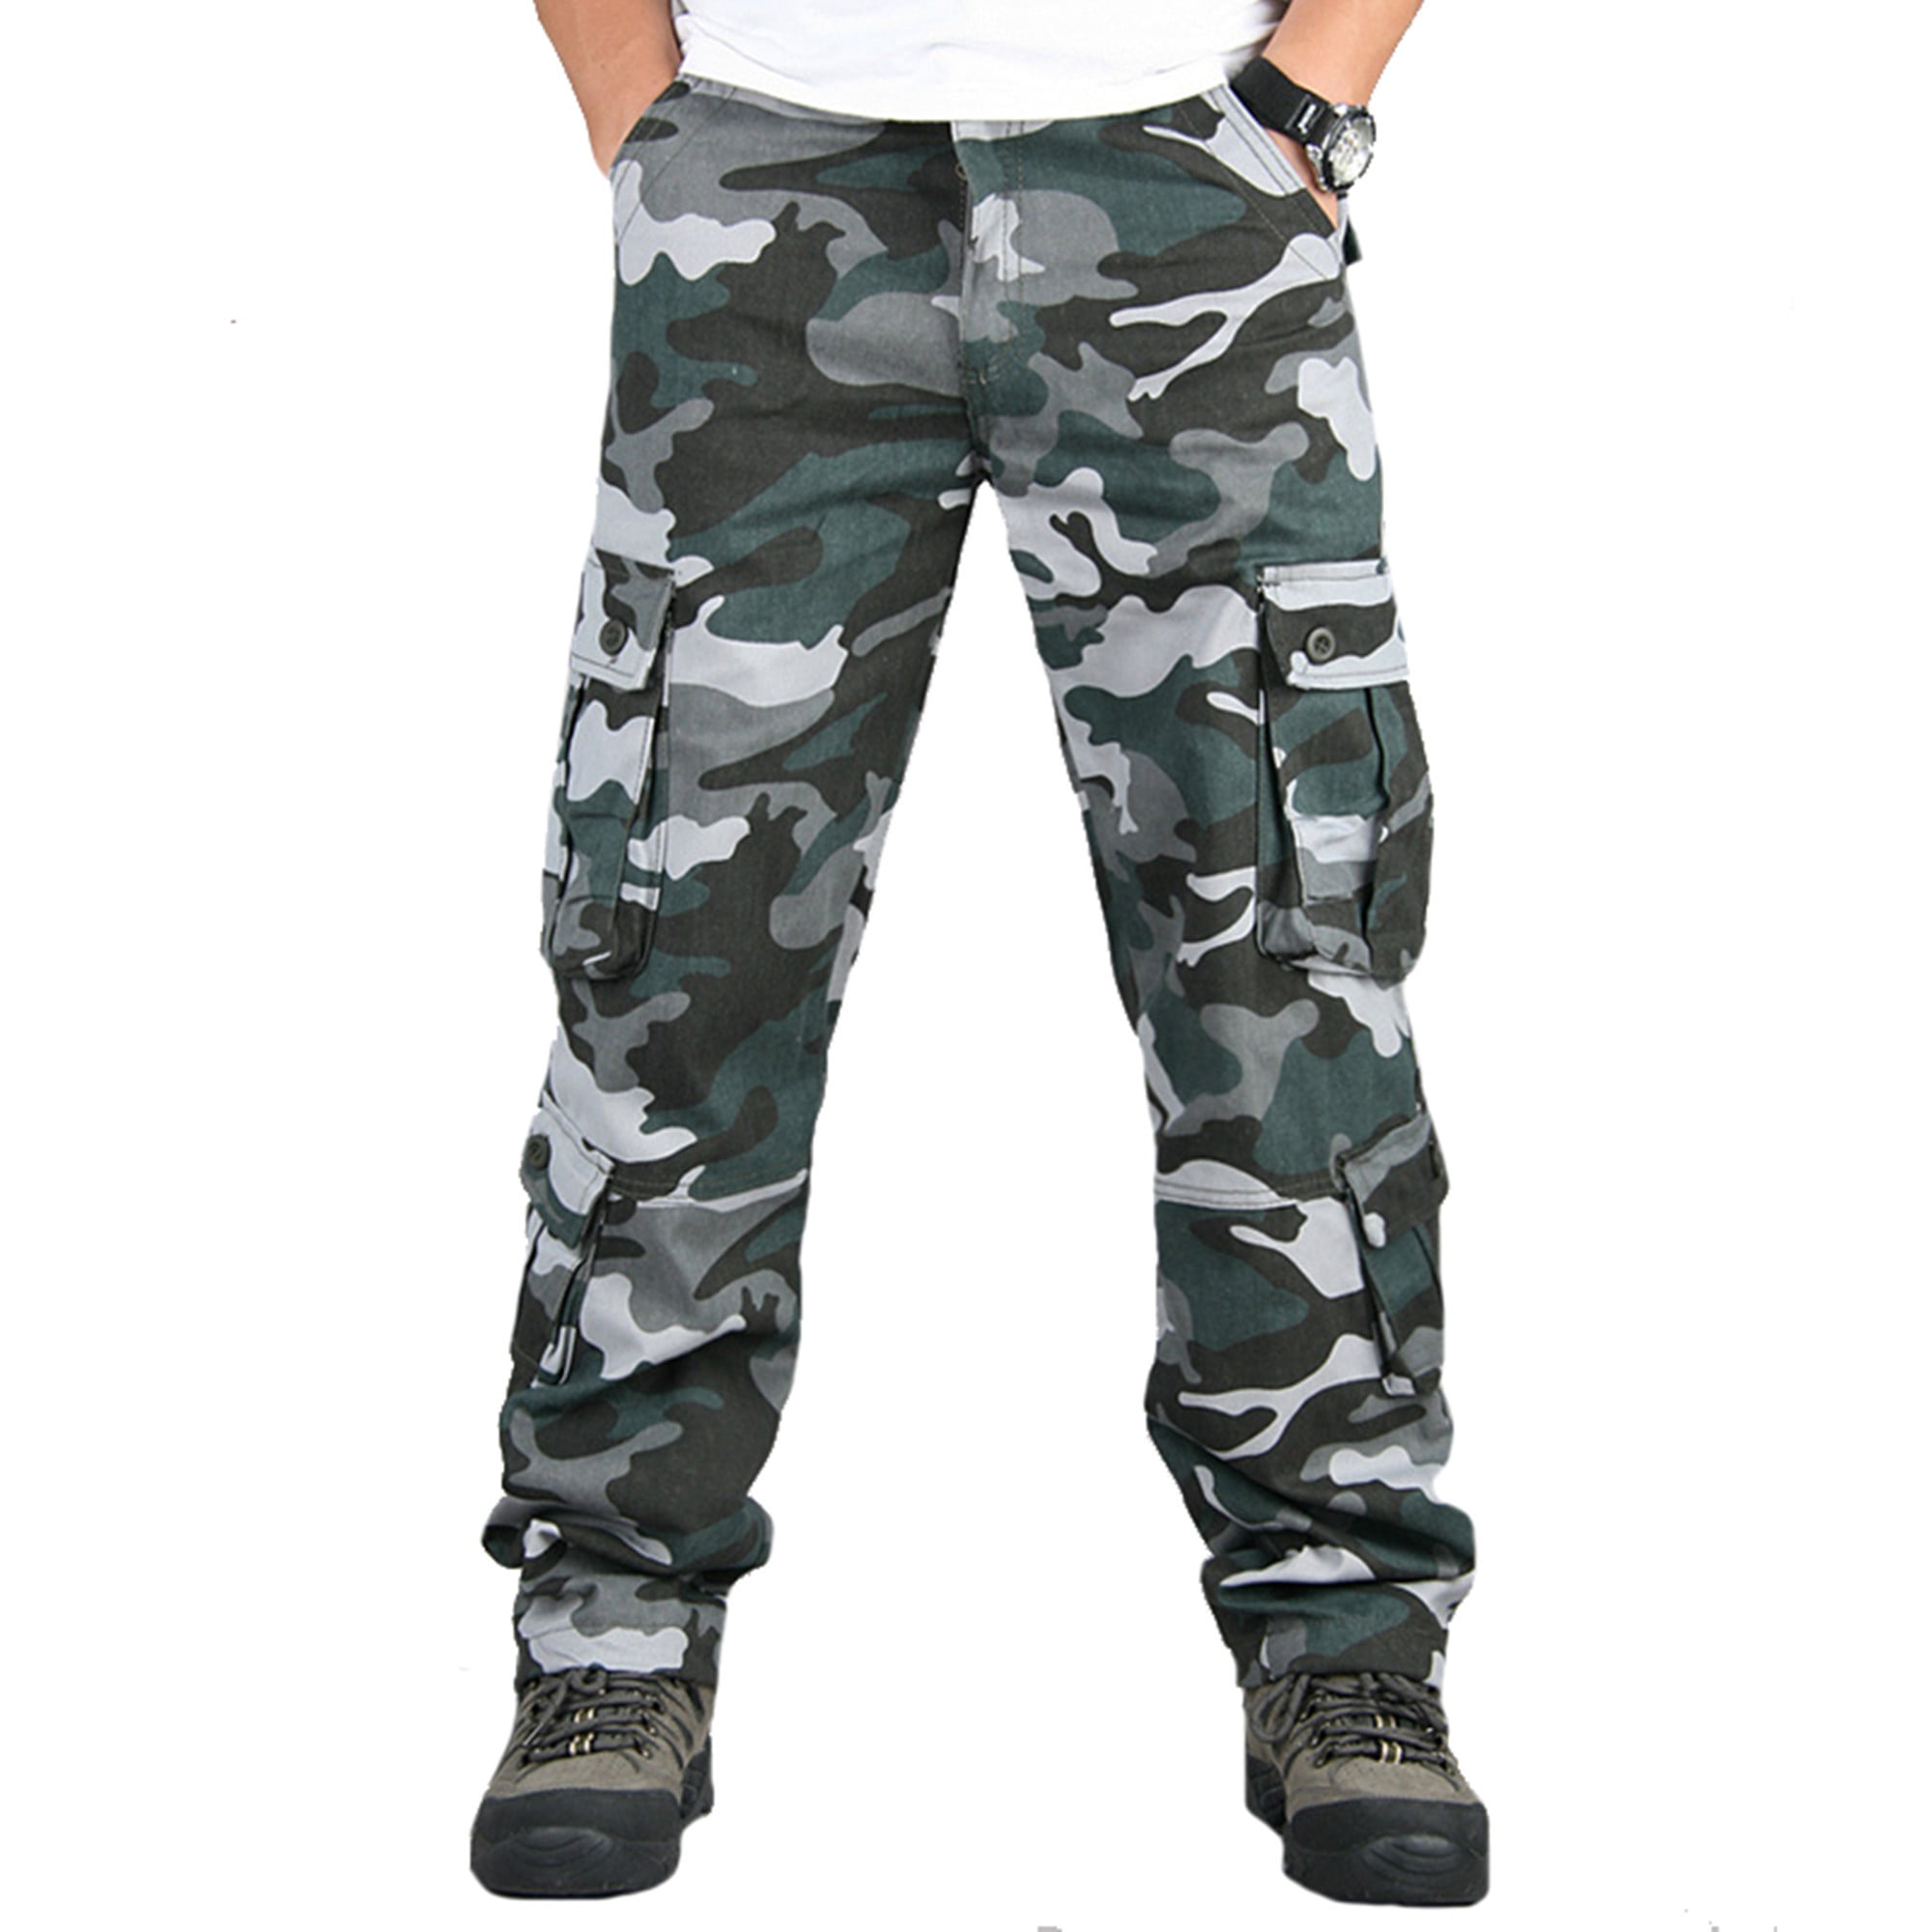 Mens Military Combat Trousers Camouflage Cargo Camo Army Casual Work Pants M-3XL 